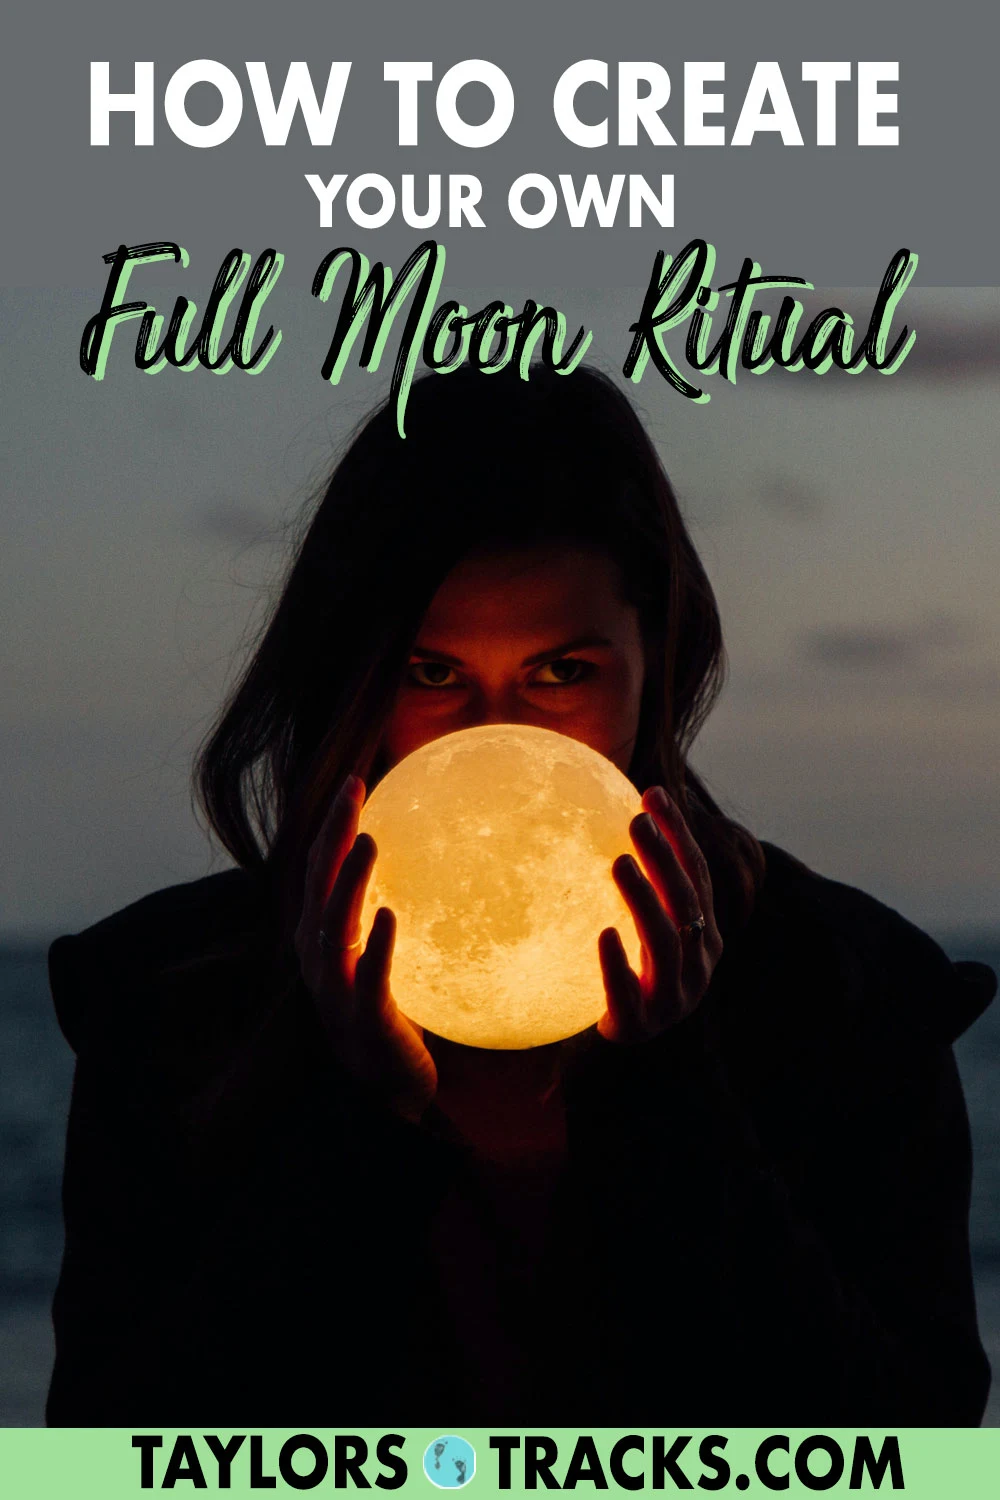 Practice this full moon ritual with friends or by yourself for a full moon ceremony that is powerful, fun and easy to do. Learn how to let go, manifest with the moon and release what is no longer serving you. Click to find out how to perform your own full moon ritual!